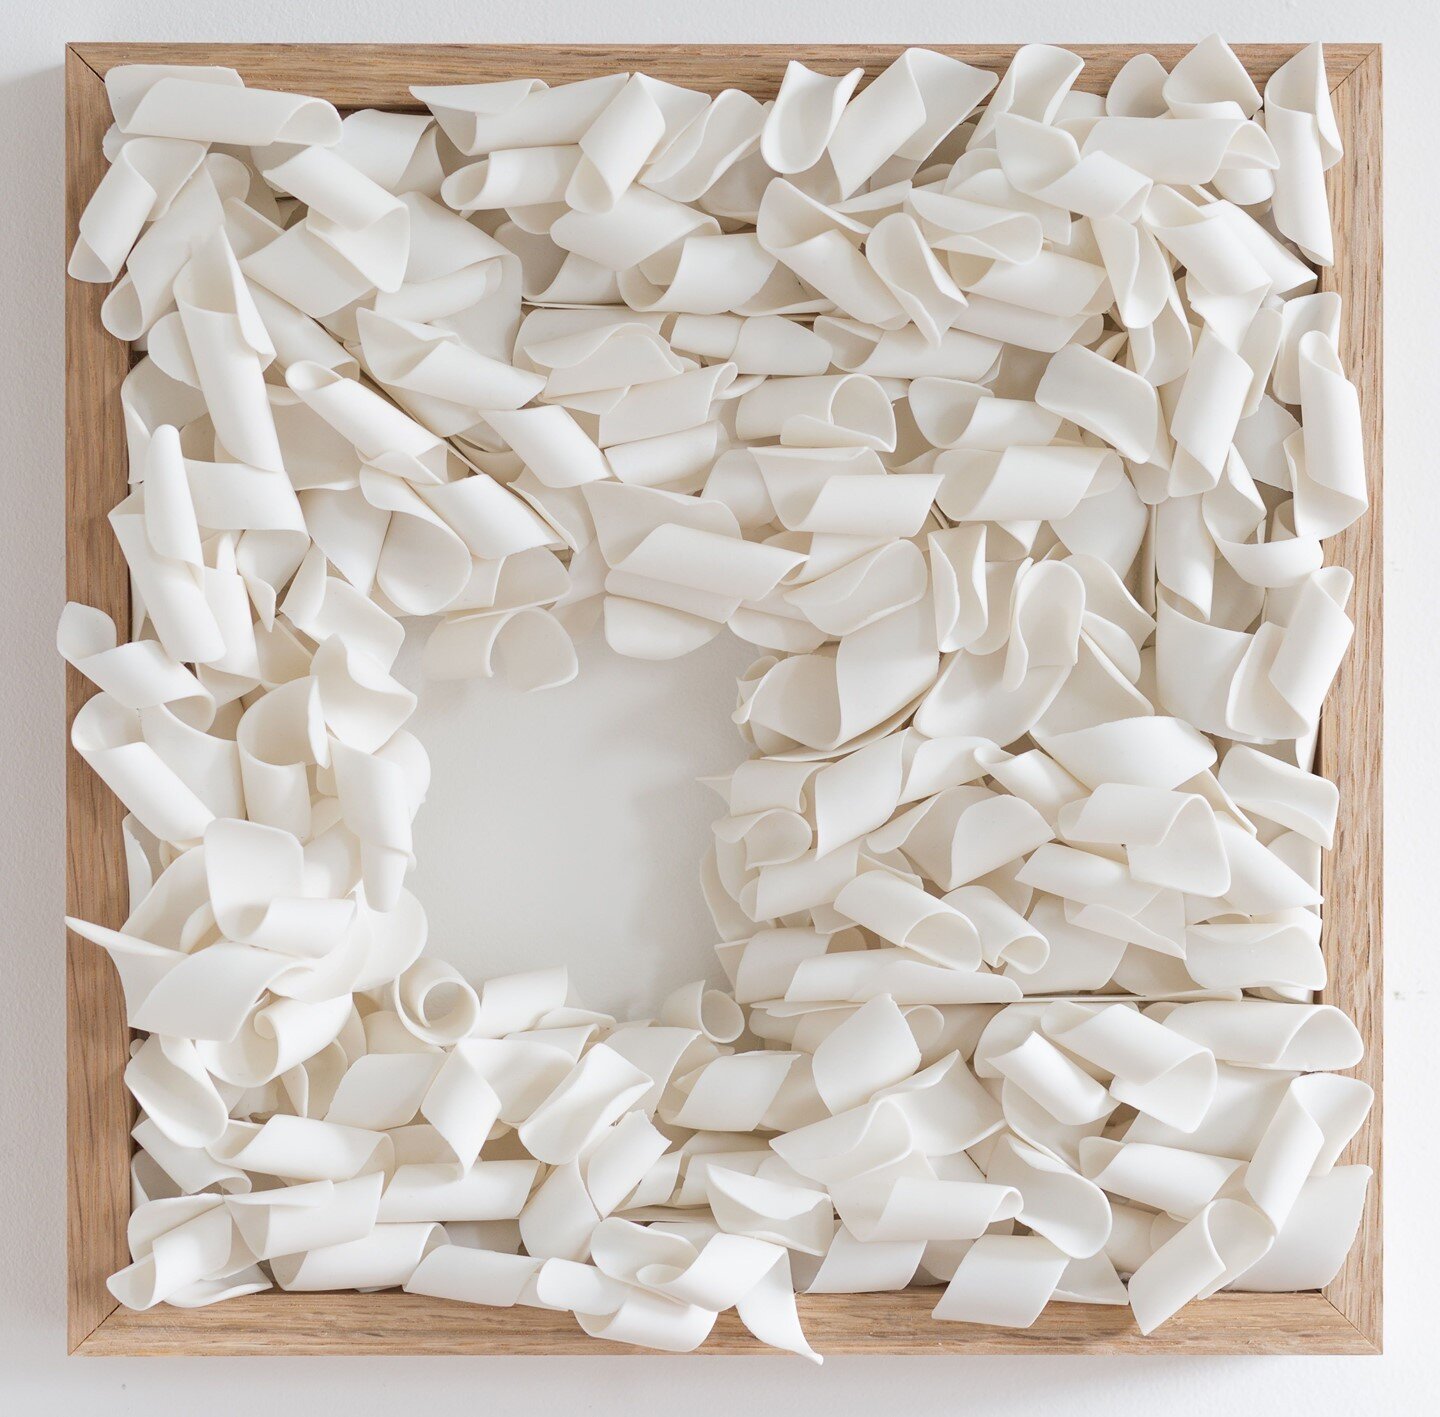 Another view of &lsquo;Accumulated memories&rsquo; with an opening. Hundreds of individual porcelain swirls, assembled one by one, carefully choosing each to sit well with another, building slowly to this tectonic formation.⁣
⁣
Oak frame, 30/30cm⁣
Le